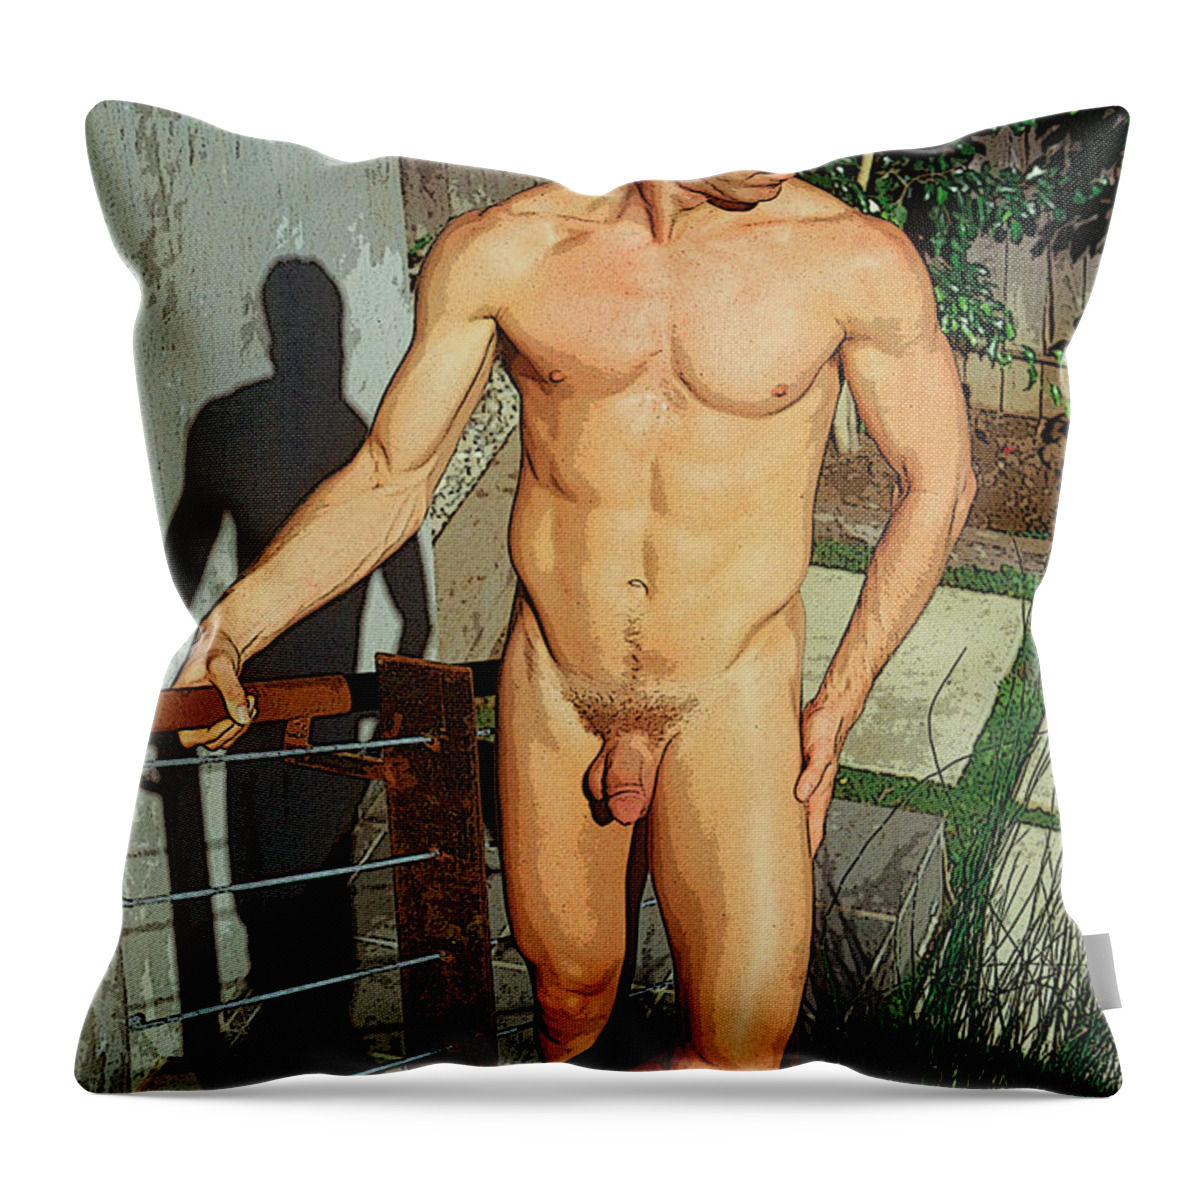 Male Throw Pillow featuring the photograph Steve S. 1-1 by Andy Shomock